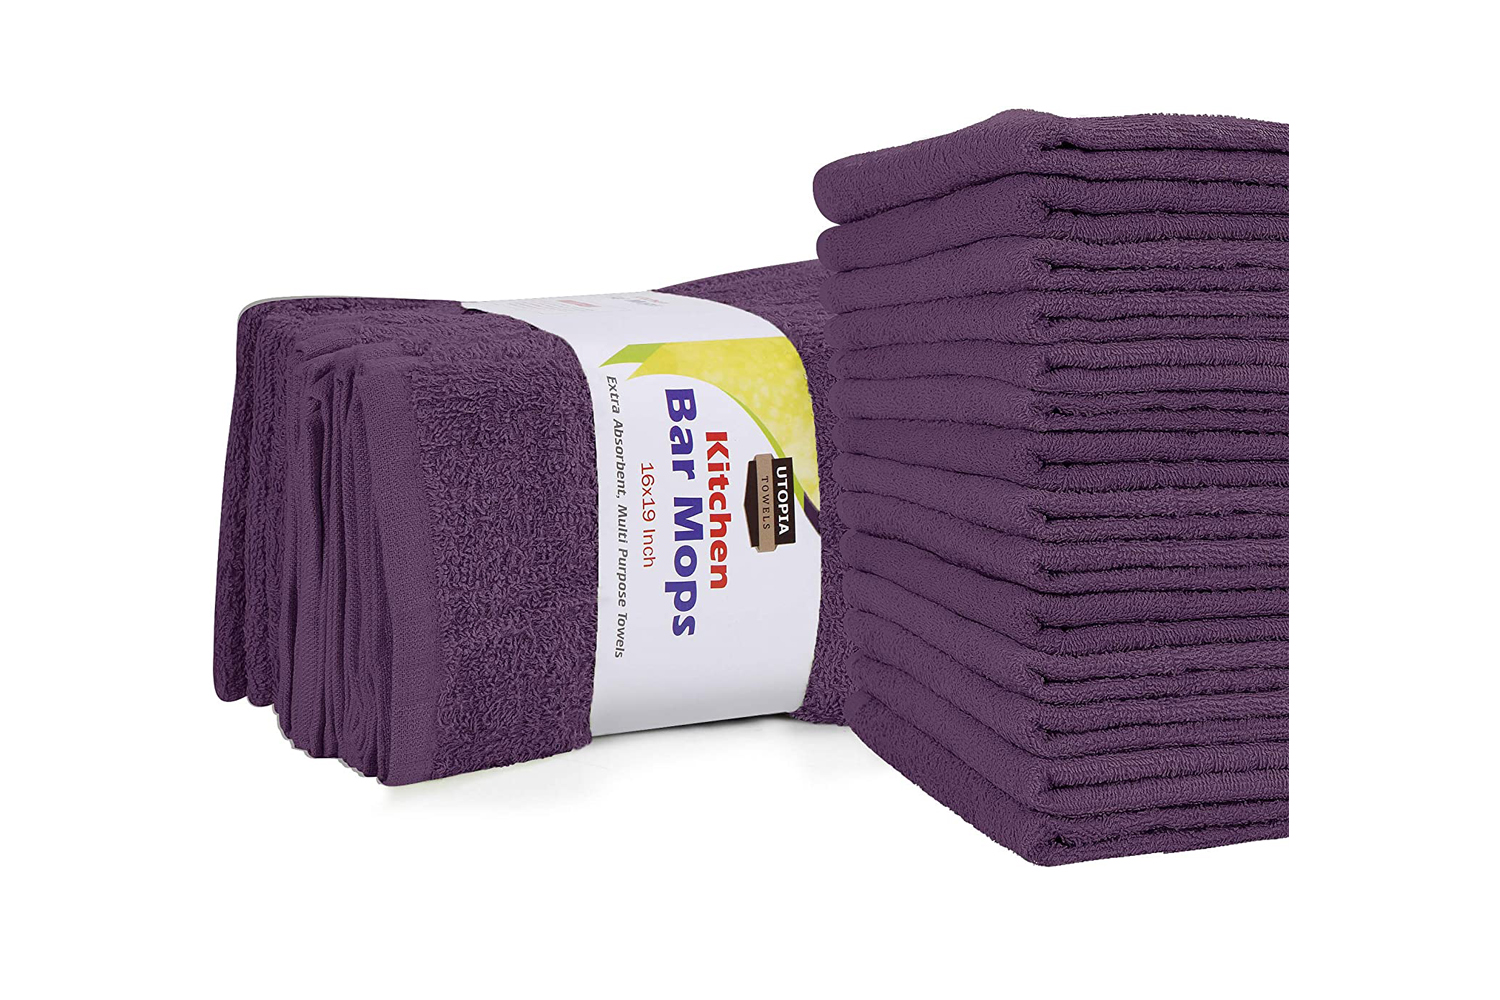 The 10 Best Kitchen Towels To Clean up Any Mess - The Manual